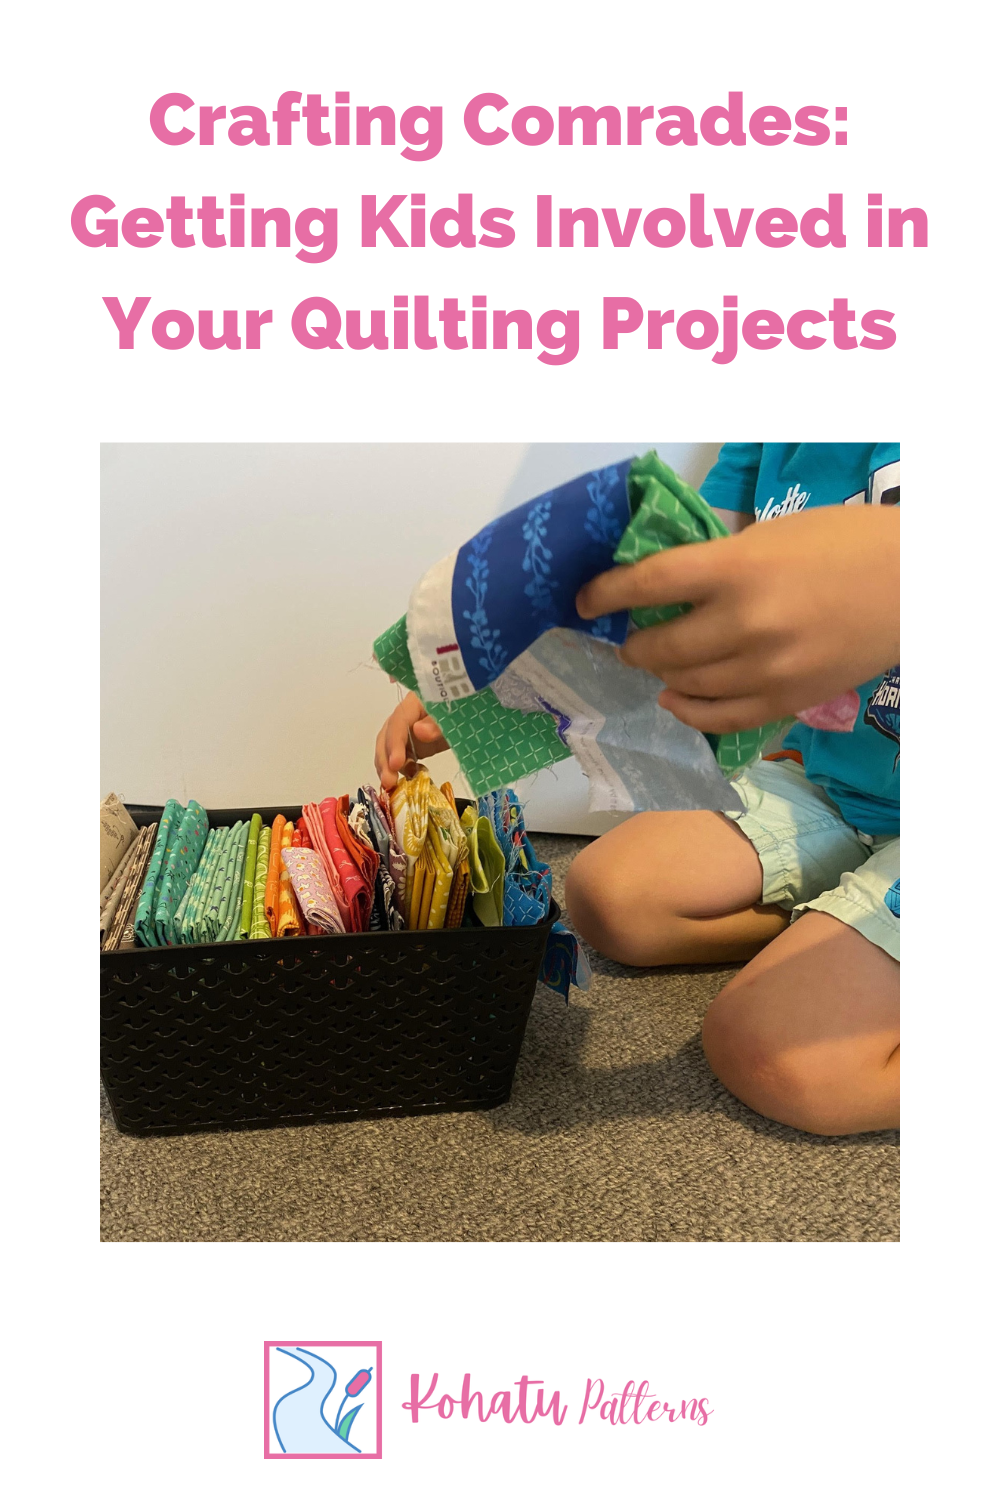 How do you find time to quilt when you have kids? Get them involved! These are some great ways to keep the kids entertained during the school holidays while carving out some quilty time for yourself!